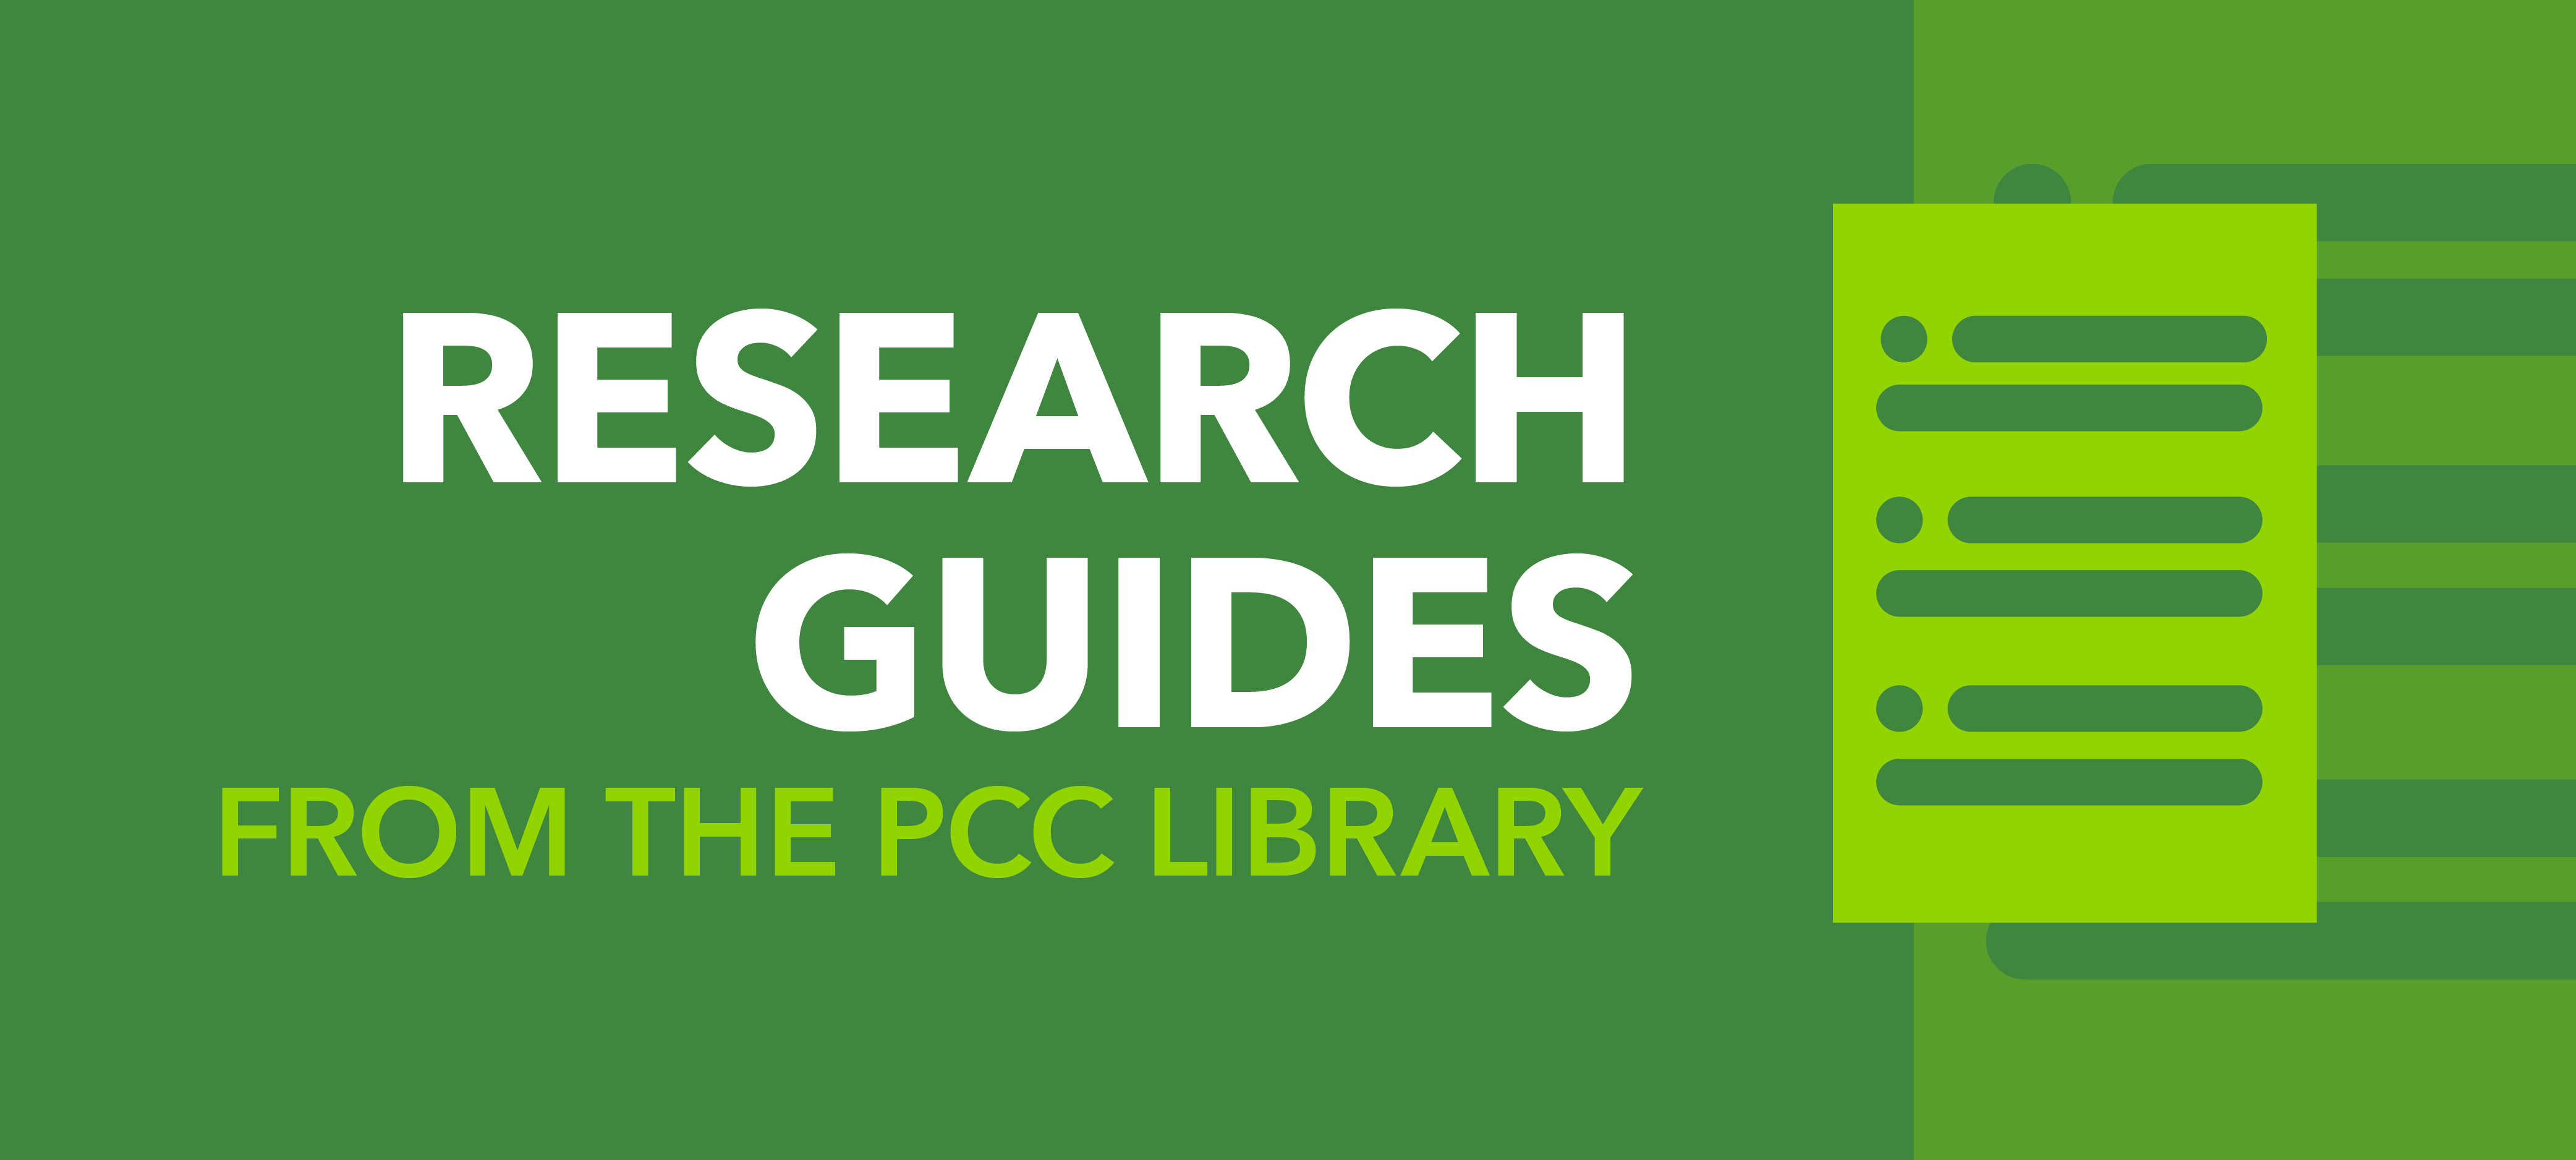 Research Guides from the PCC Library